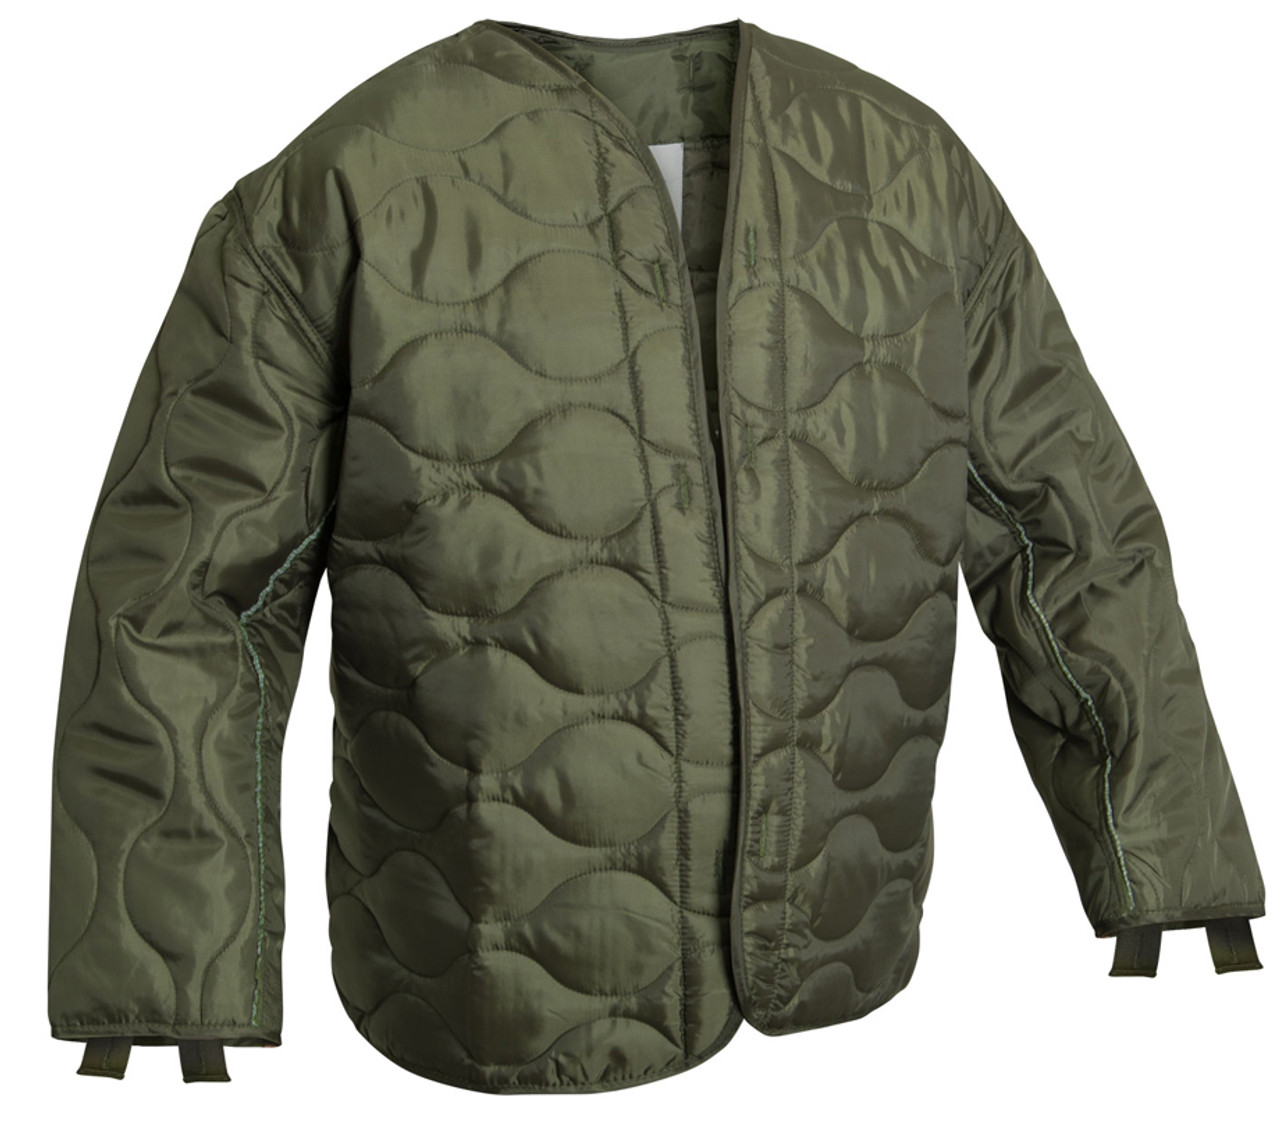 Shop Military M65 Field Jacket Liners - Fatigues Army Navy